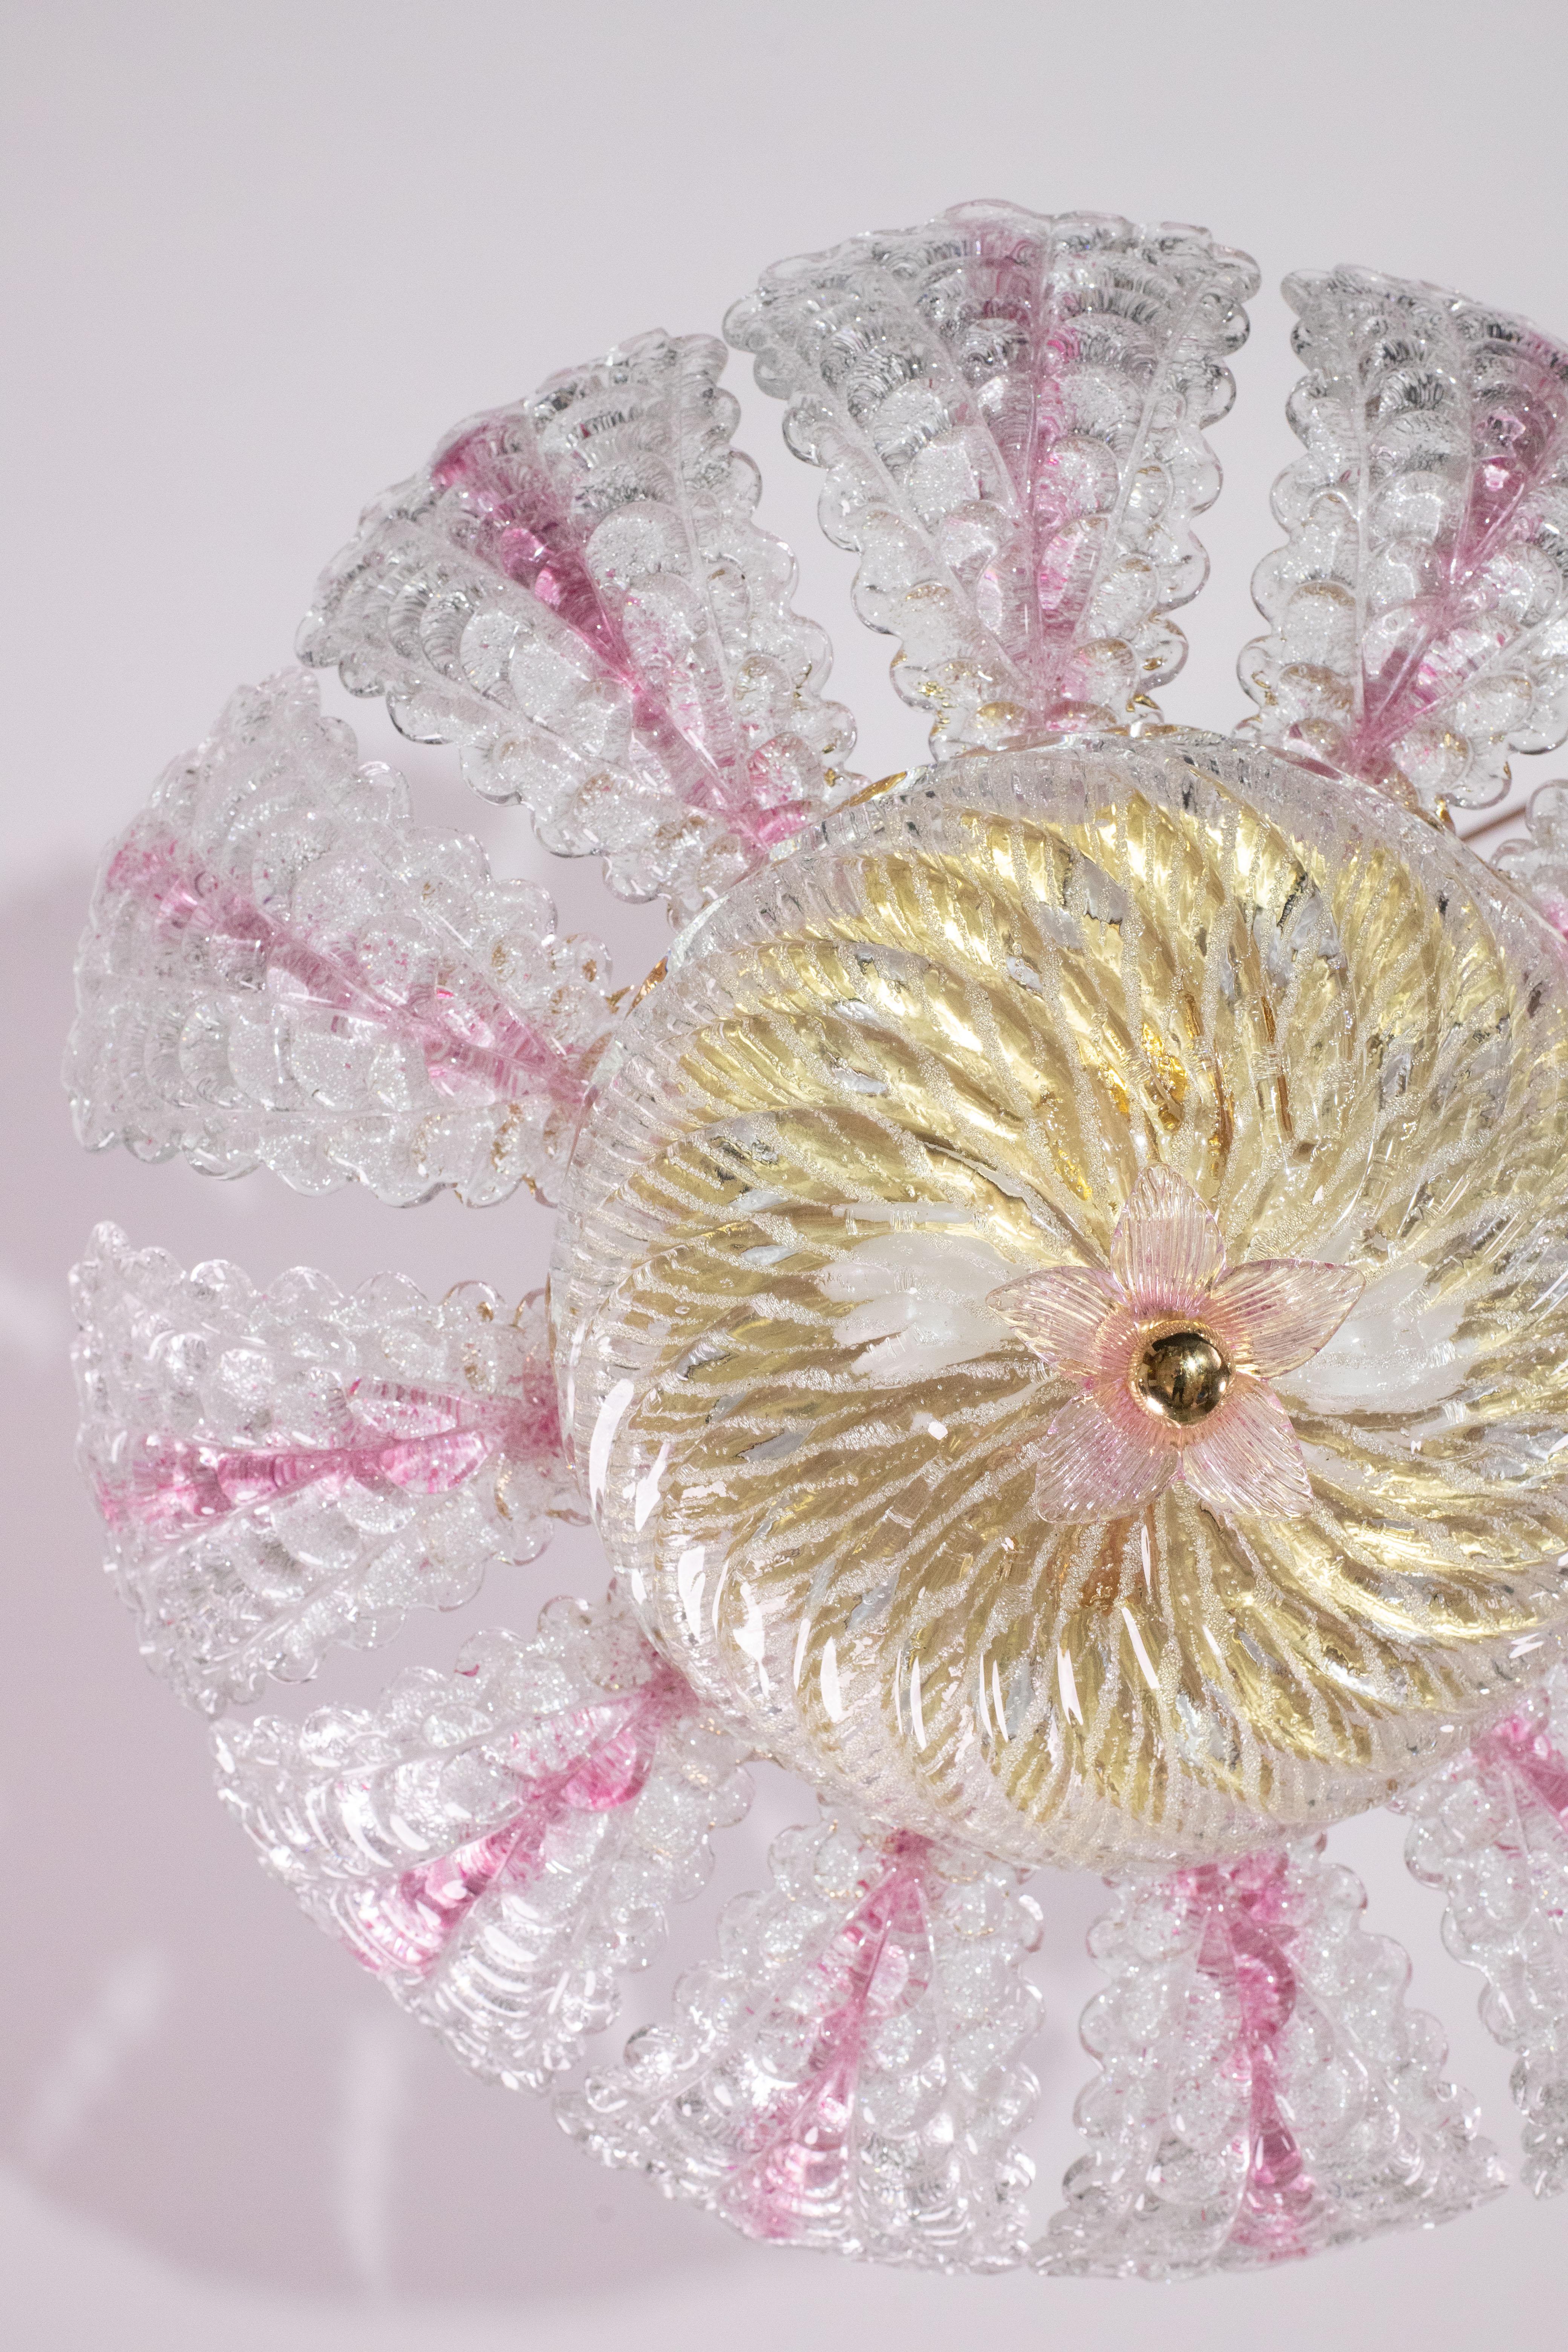 Charming Pink Murano Glass Leave Ceiling Light or Chandelier, 1970s For Sale 3